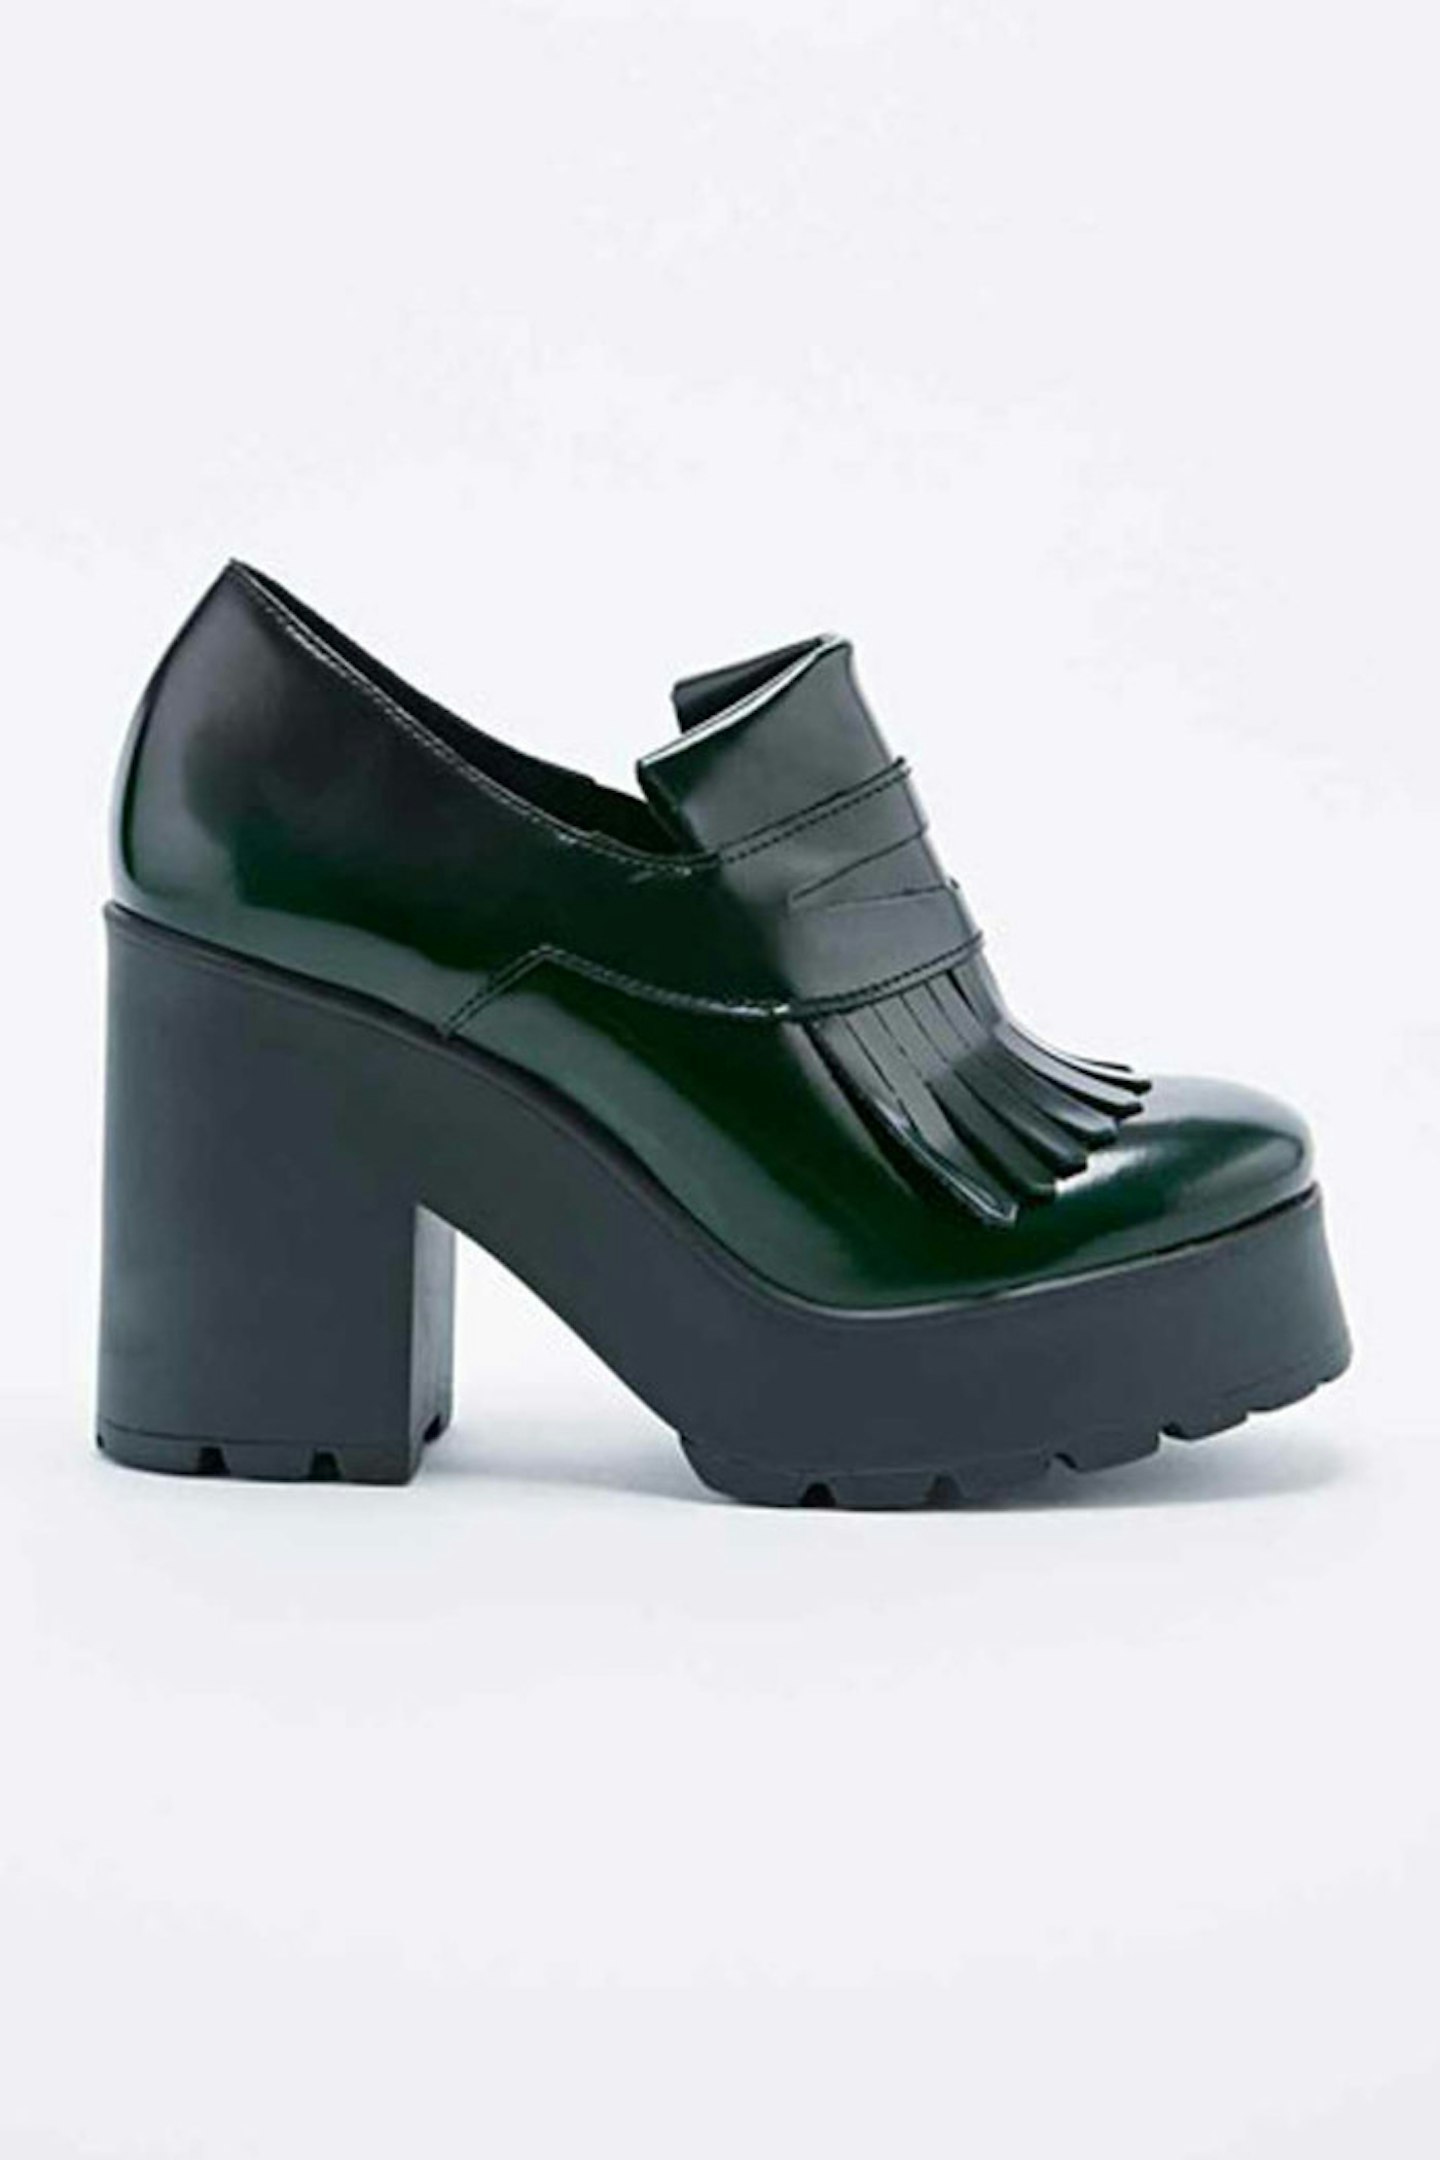 Shoes, £175, Miista Alexia at Urban Outfitters